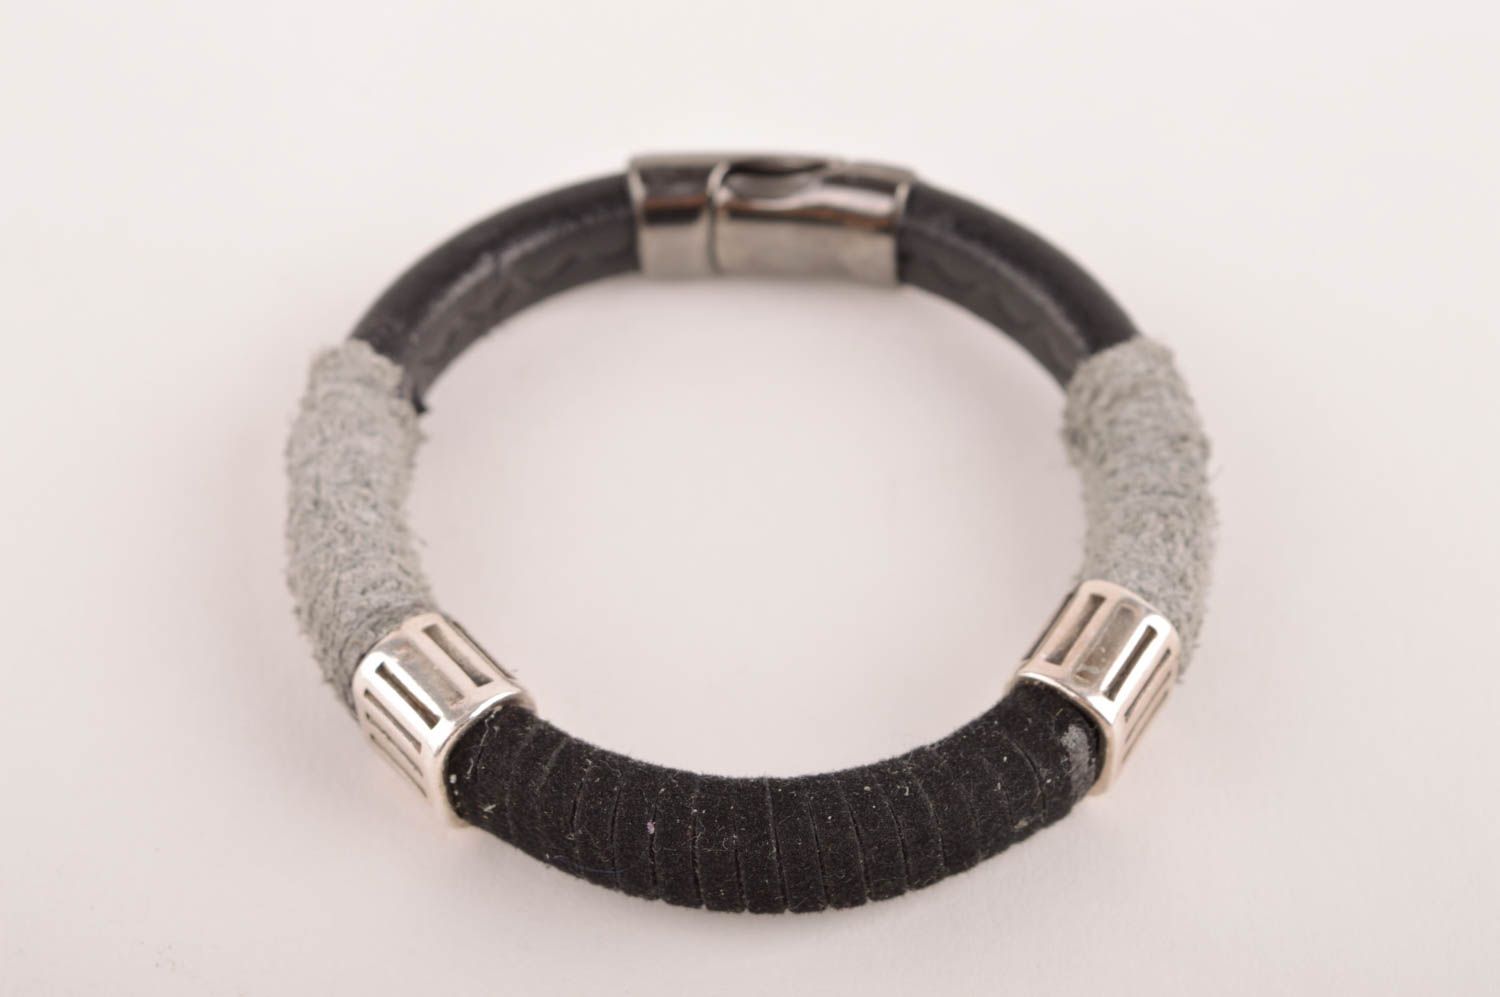 Unusual handmade leather bracelet leather goods handmade accessories for girls photo 2